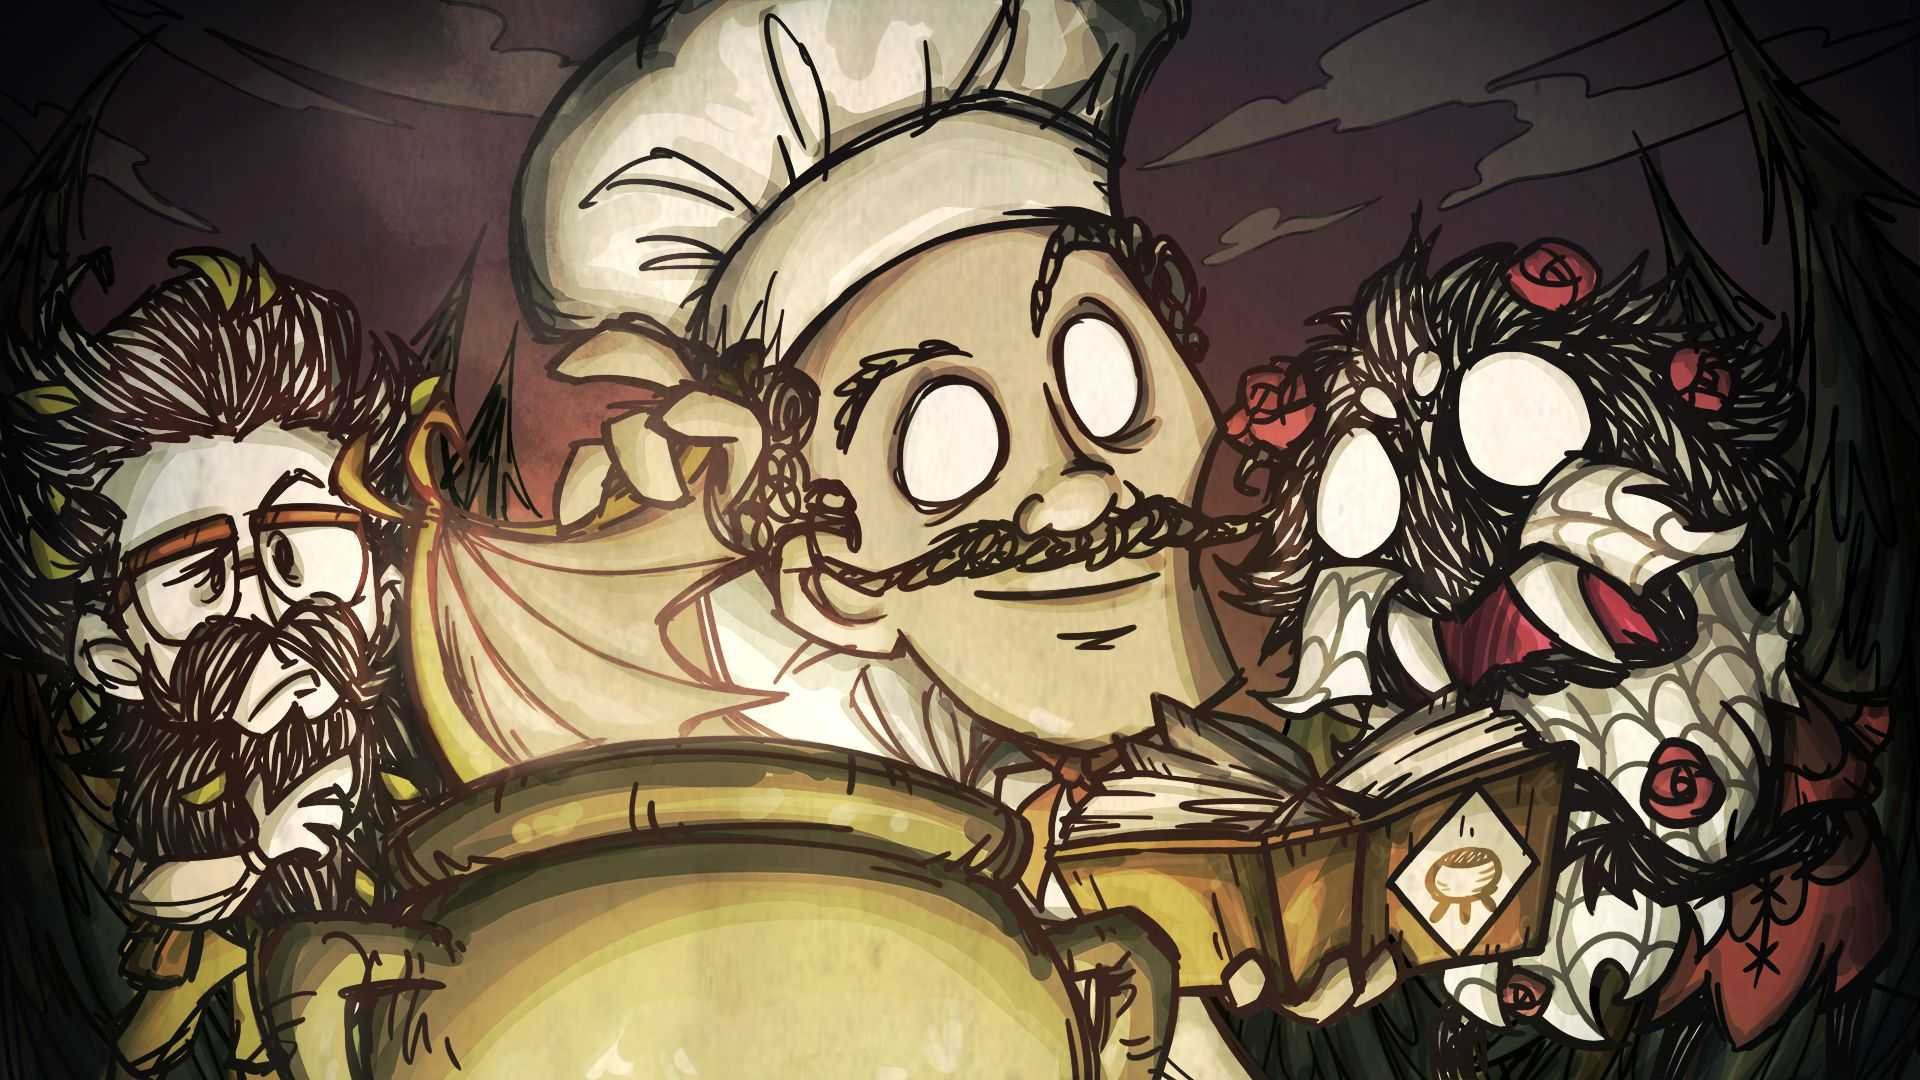 Don t start new. Don t Starve together. Don't Starve together обновление. Don't Starve together Варли.